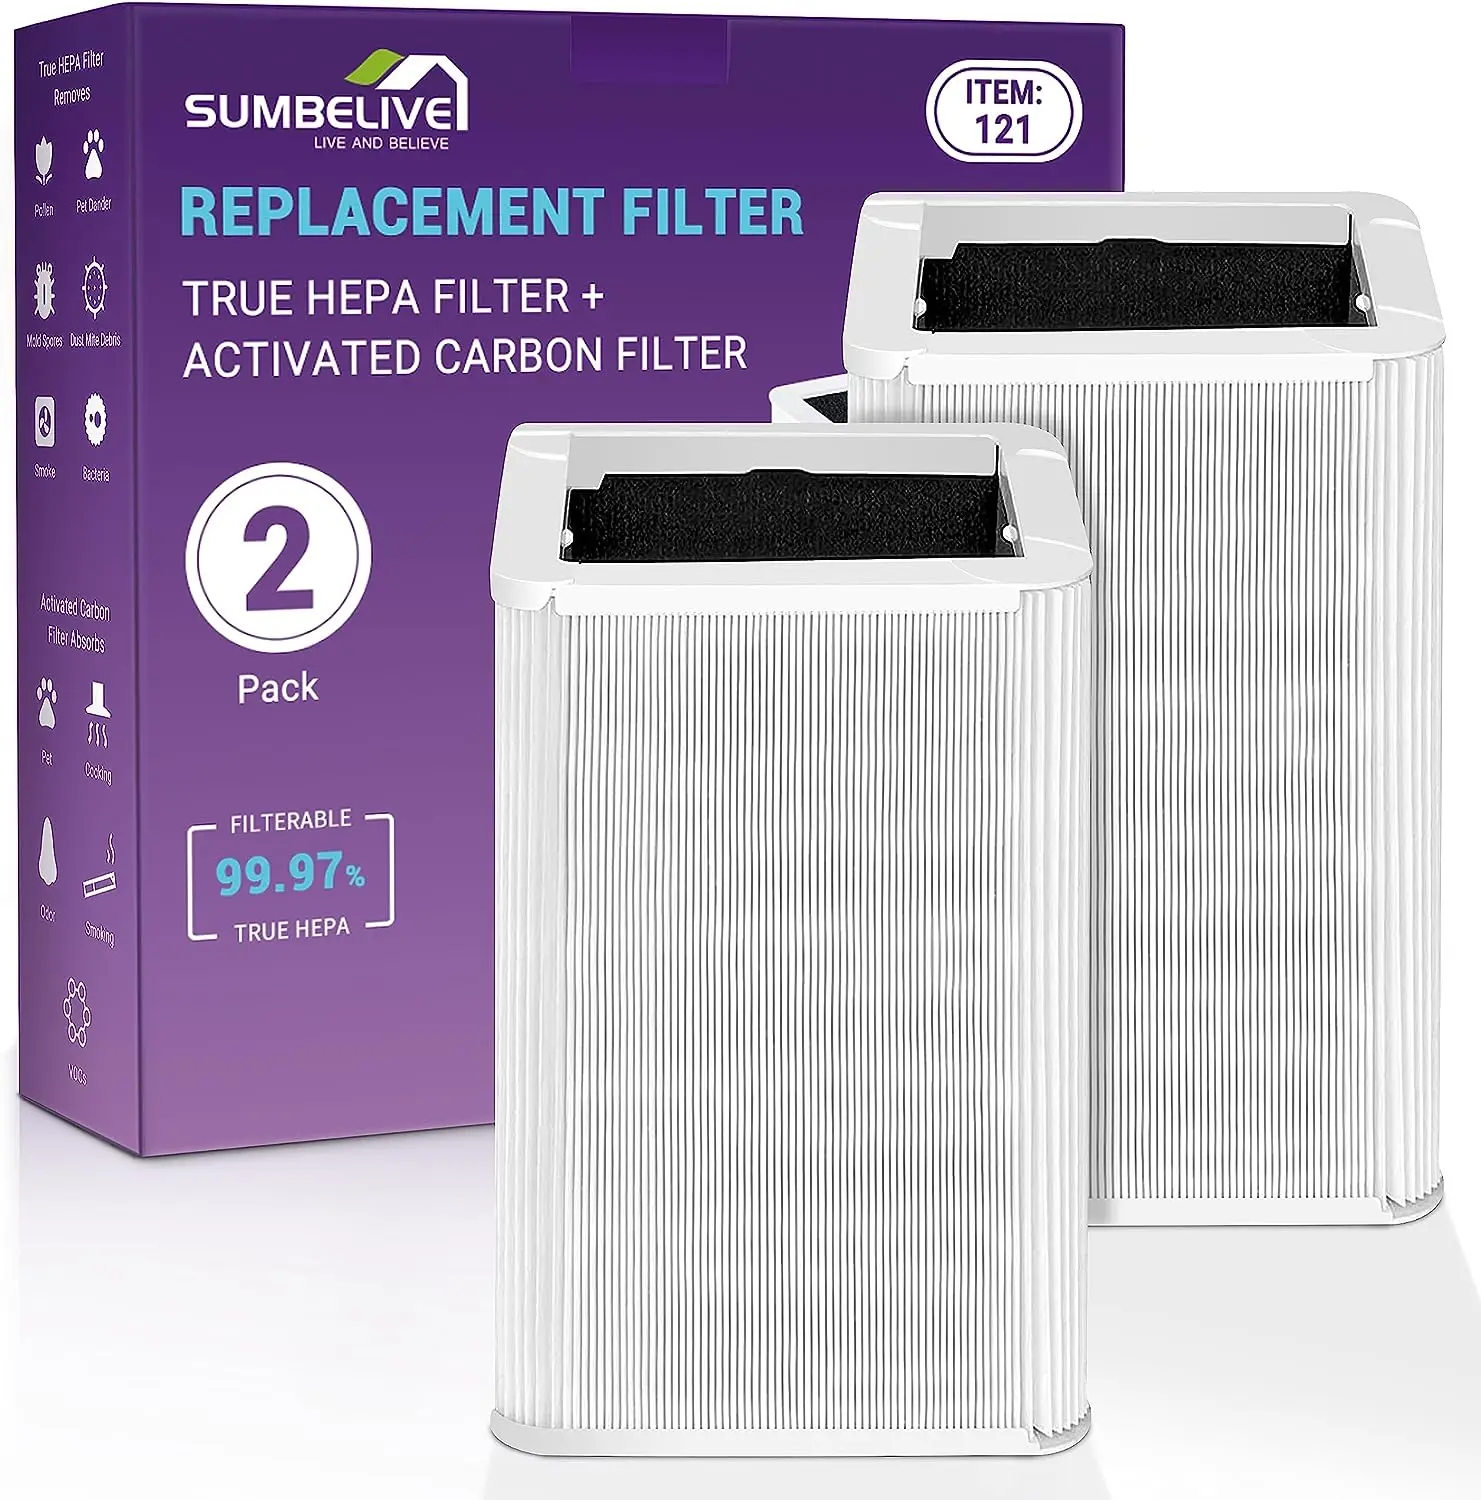 

Pack 121 Replacement Filter for Blueair Blue Pure 121 Air Purifier, with Particle, Activated Carbon and H13 True HEPA Filters